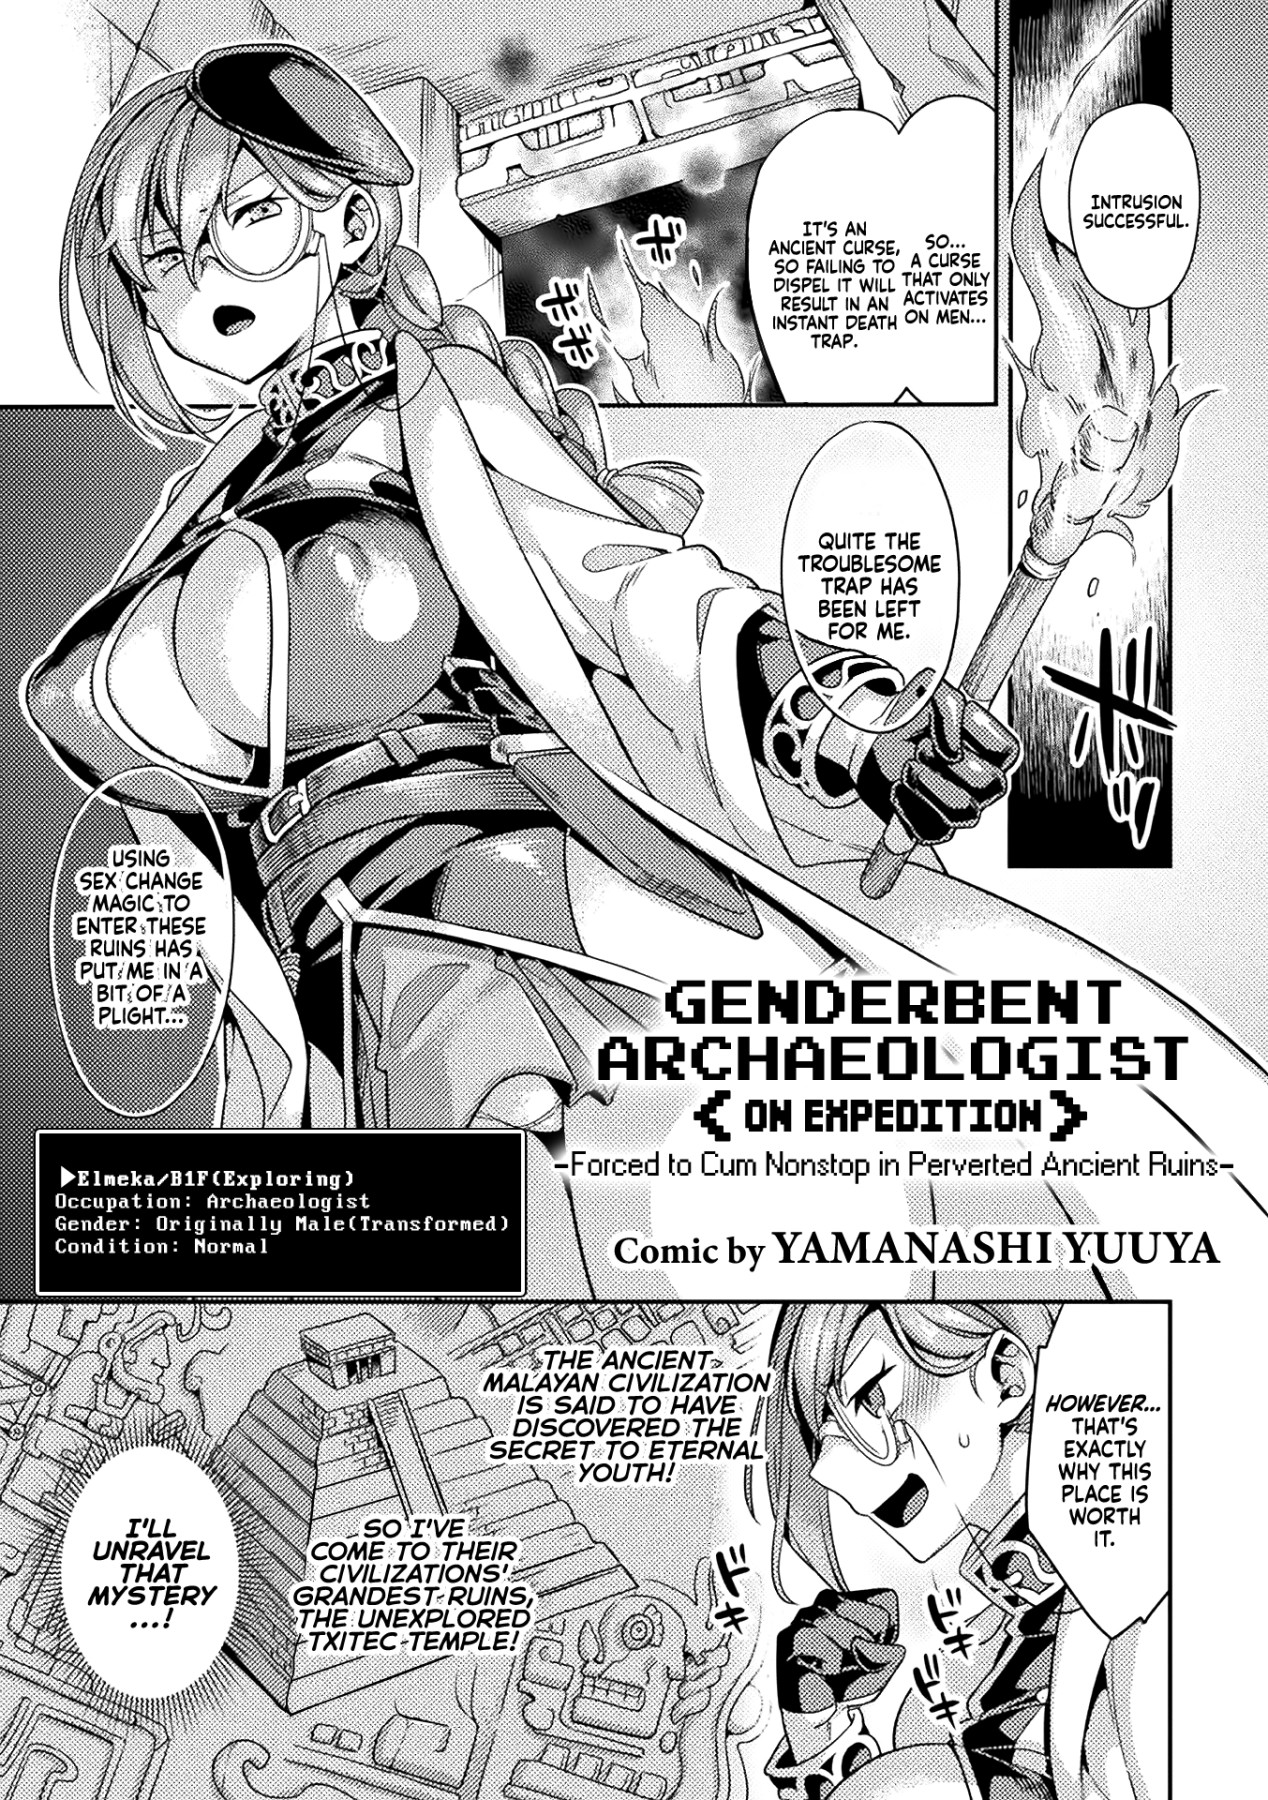 Hentai Manga Comic-Genderbent Archaeologist <on expedition> -Forced to Cum Nonstop in Perverted Ancient Ruins--Read-1